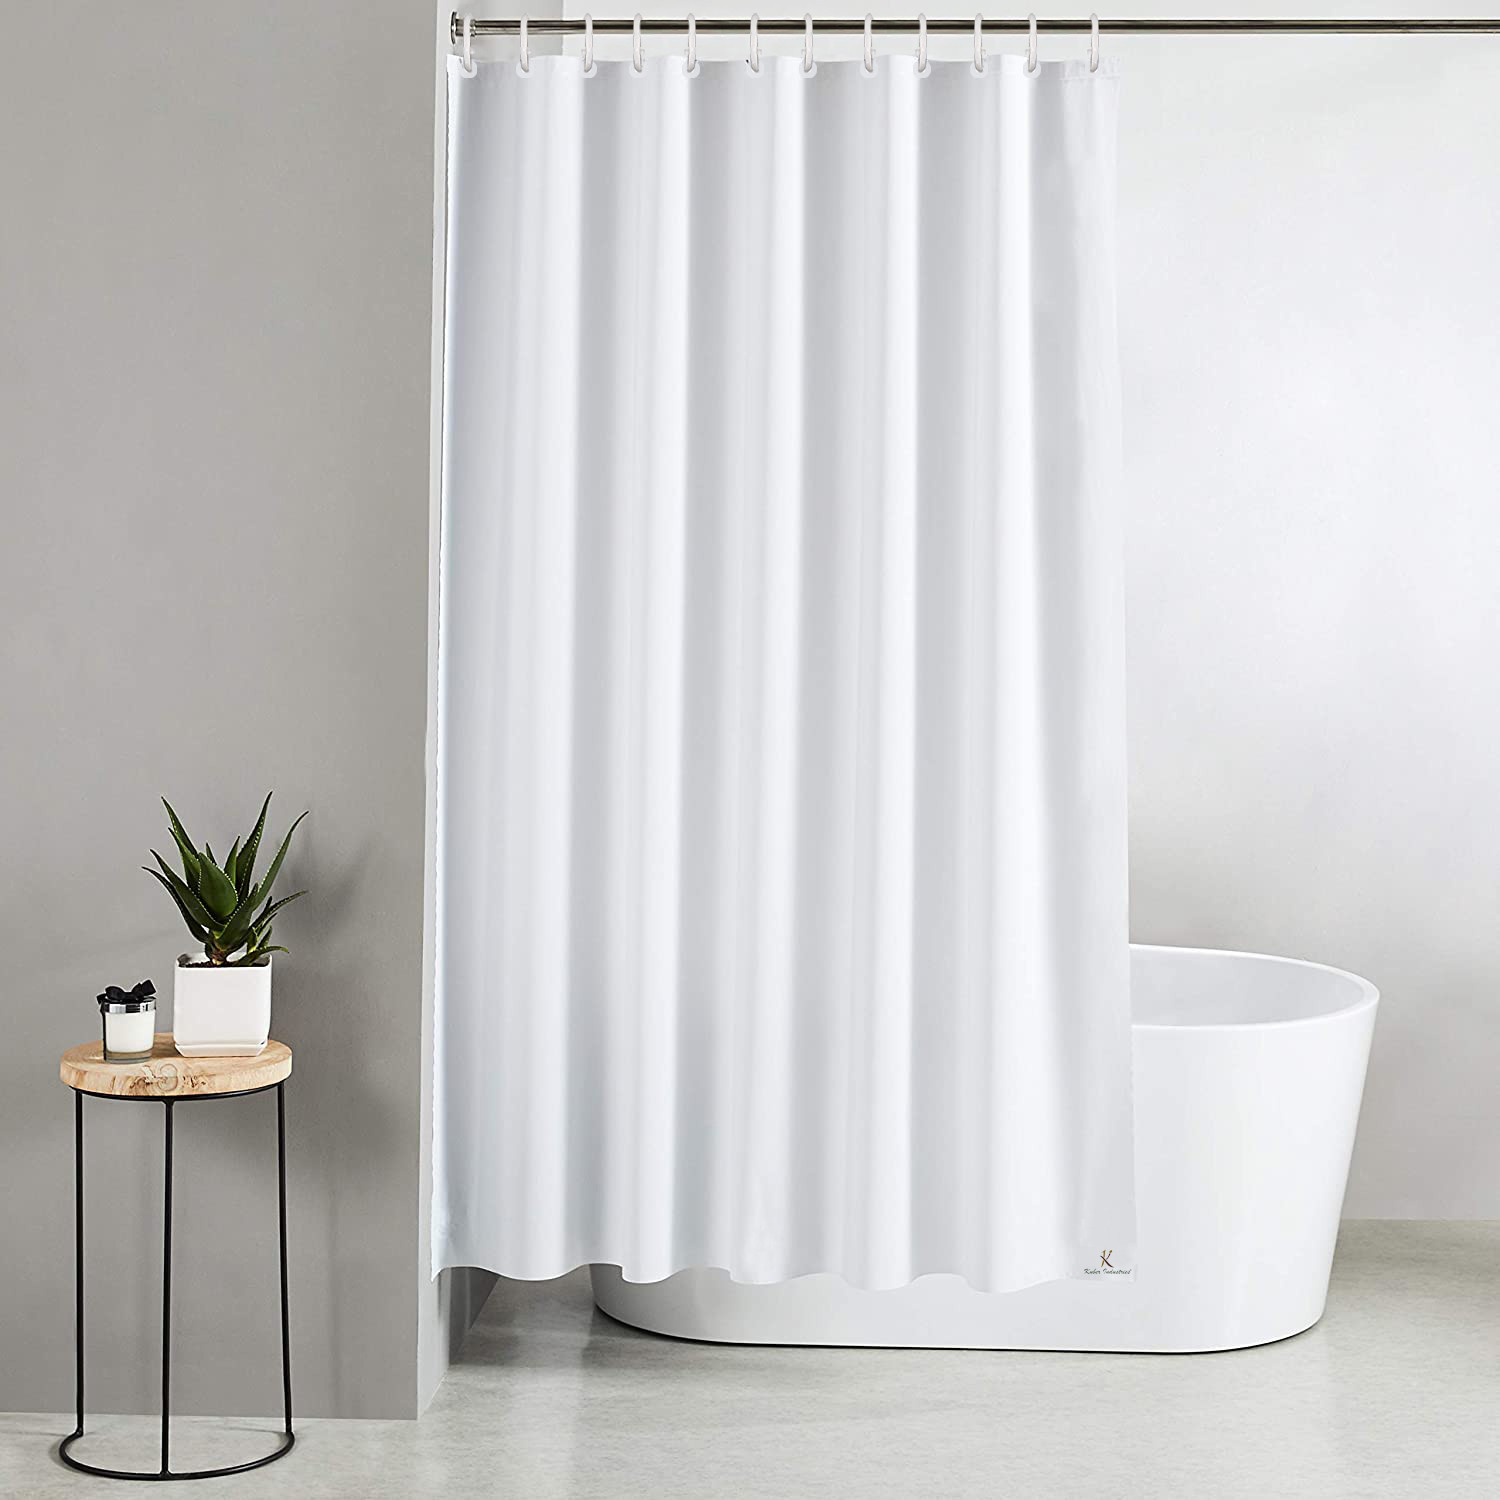 Kuber Industries 2 Pieces PEVA Shower Curtain Liner , Heavy Duty Plastic Shower Curtain With Hooks for Bathroom, Bathtub, 70